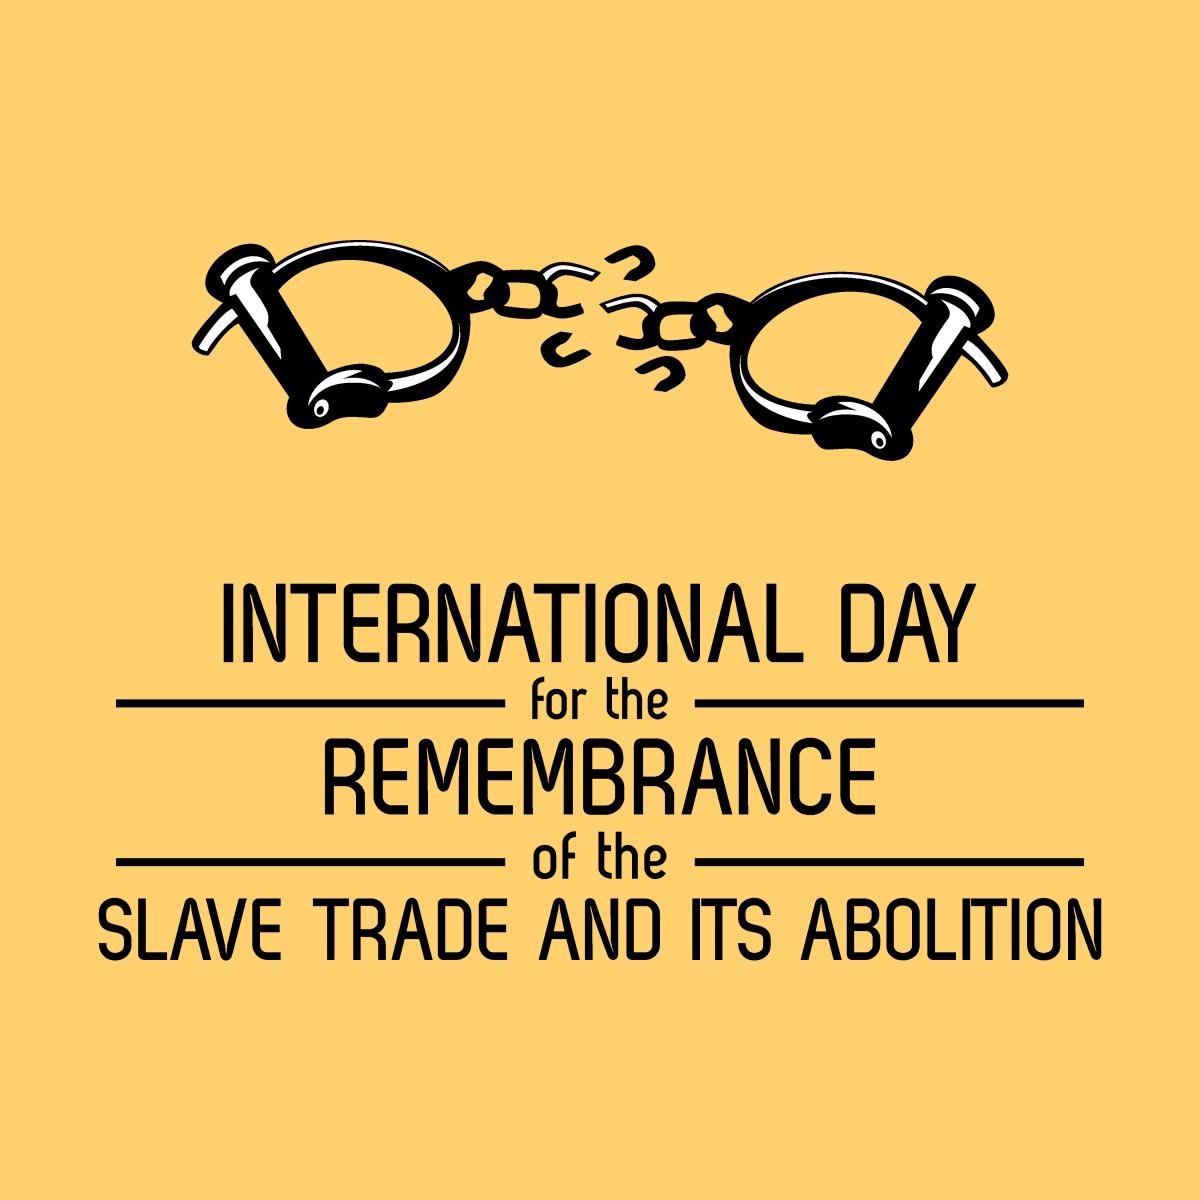 International Day for Remembrance of the Slave Trade and Its Abolition